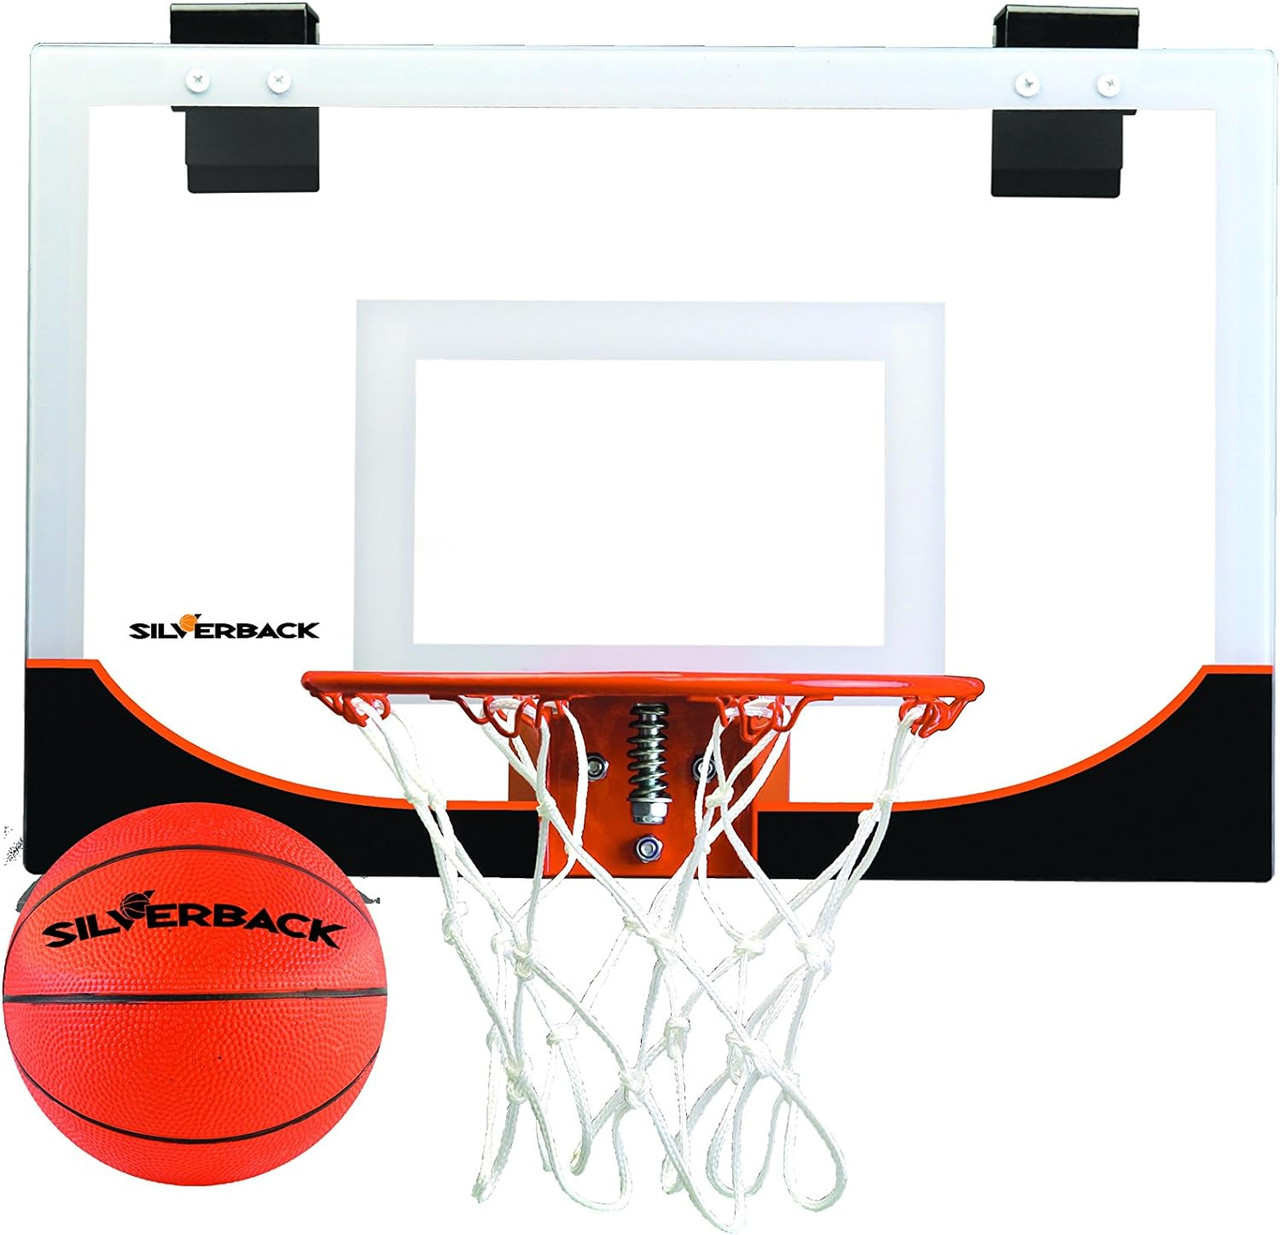 Silverback 18" Mini Basketball Over-the-Door Hoop with Ball-Chicken Pieces